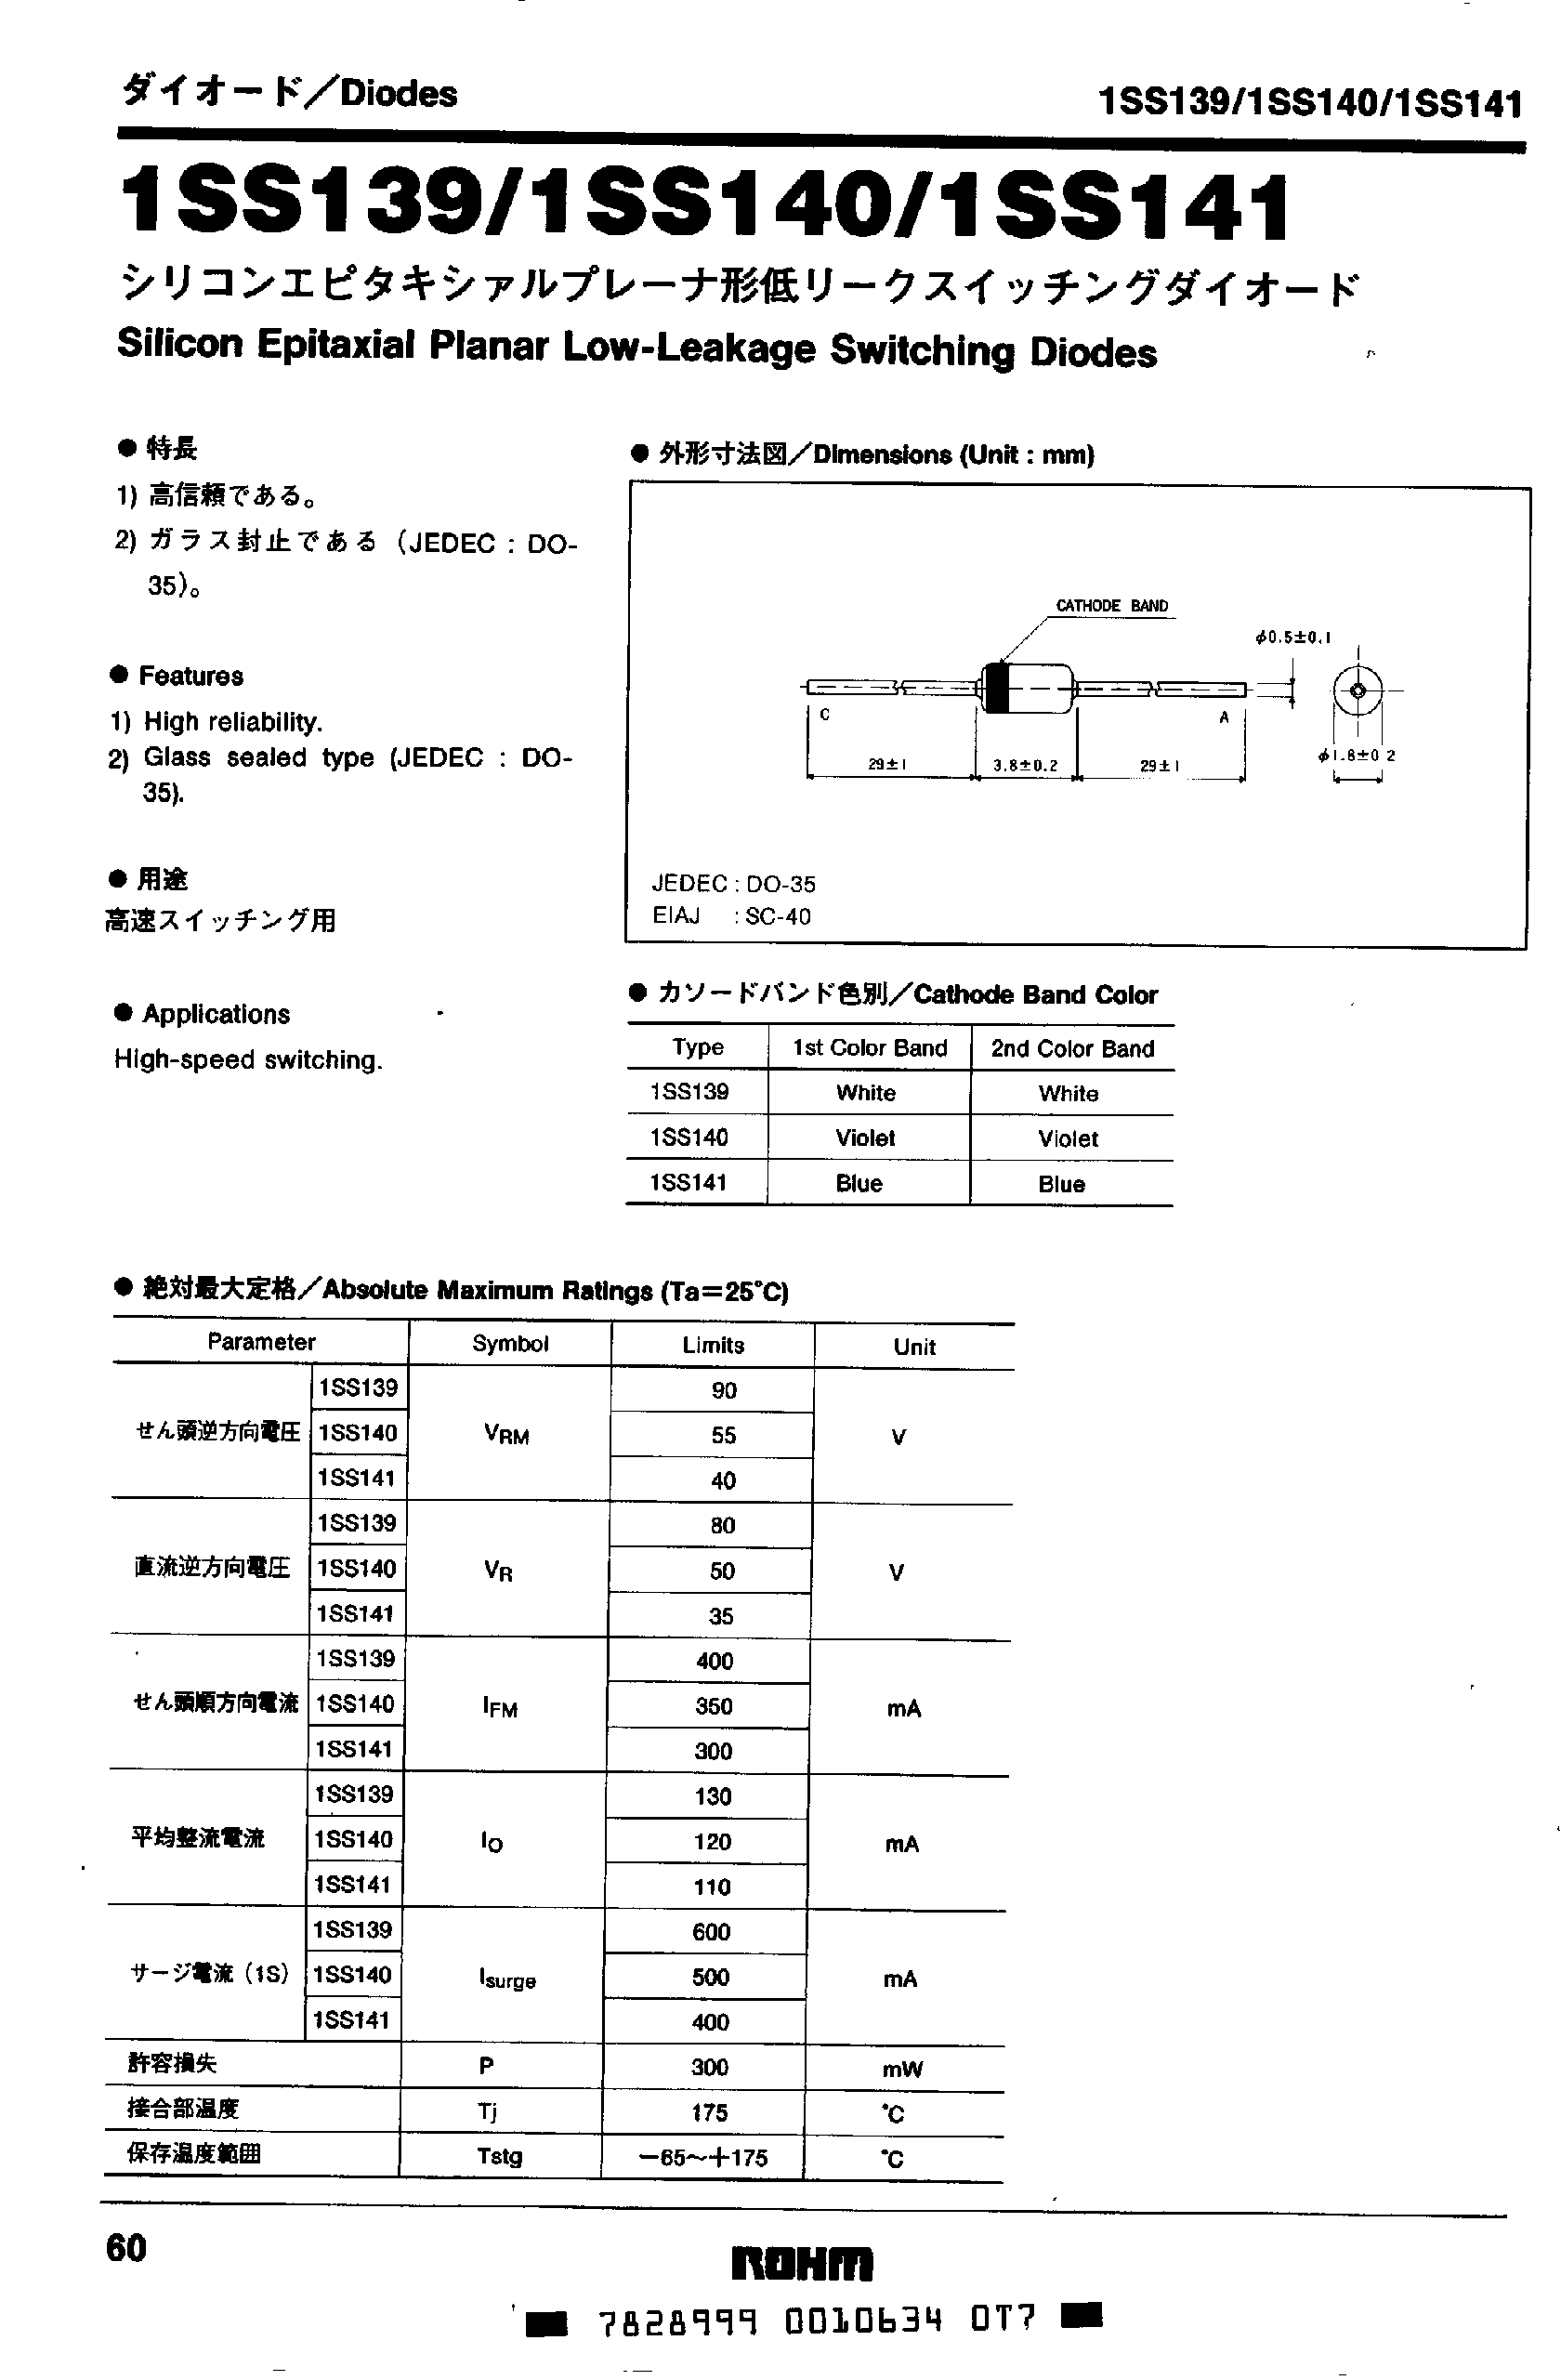 Datasheet 1SS140 - (1SS140 - 1SS141) DIODE page 1